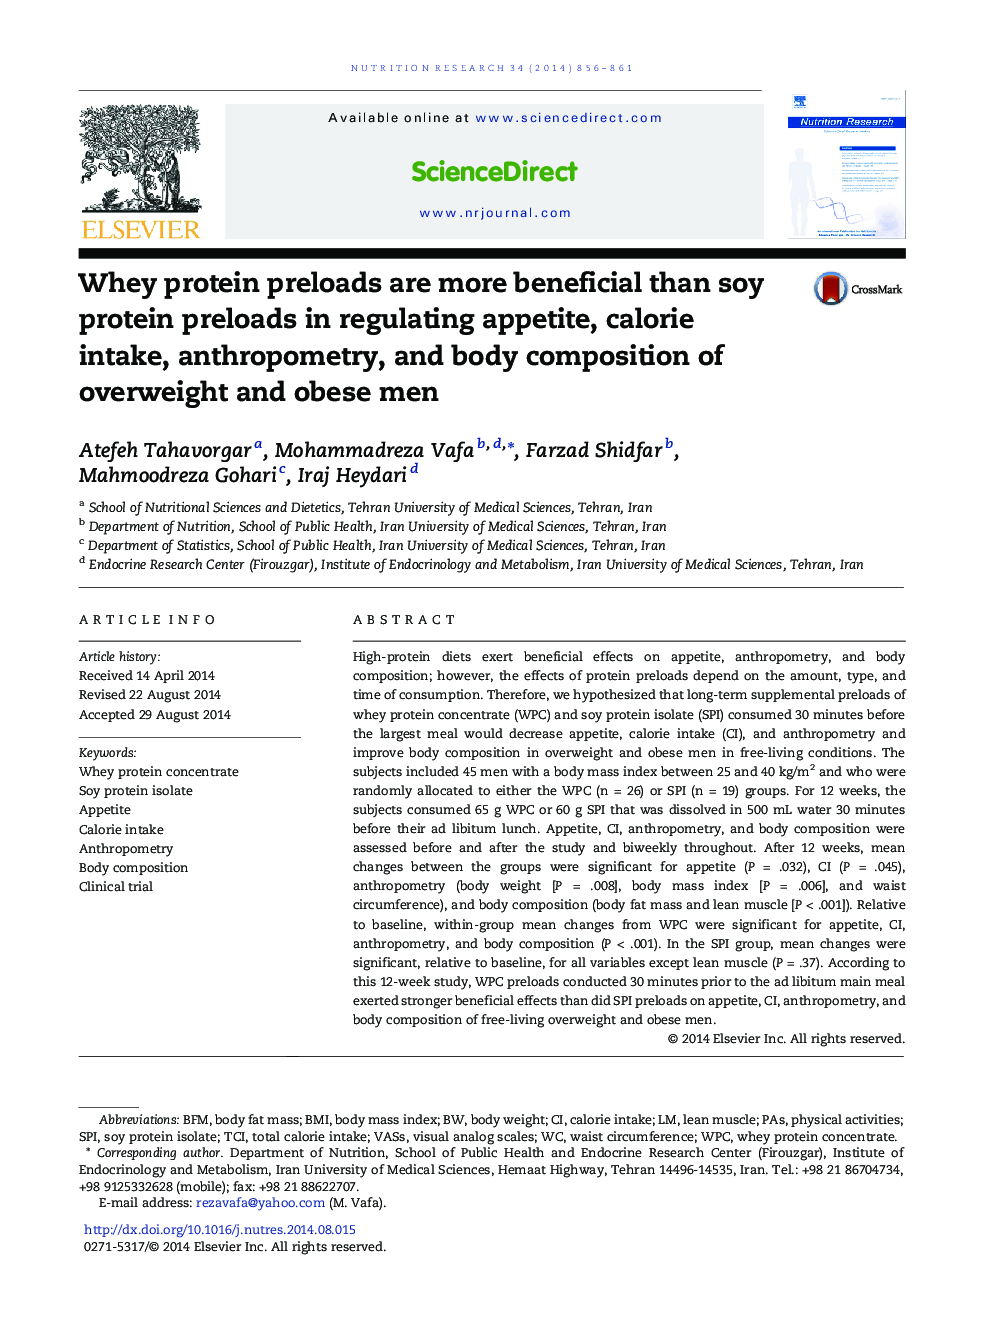 Whey protein preloads are more beneficial than soy protein preloads in regulating appetite, calorie intake, anthropometry, and body composition of overweight and obese men